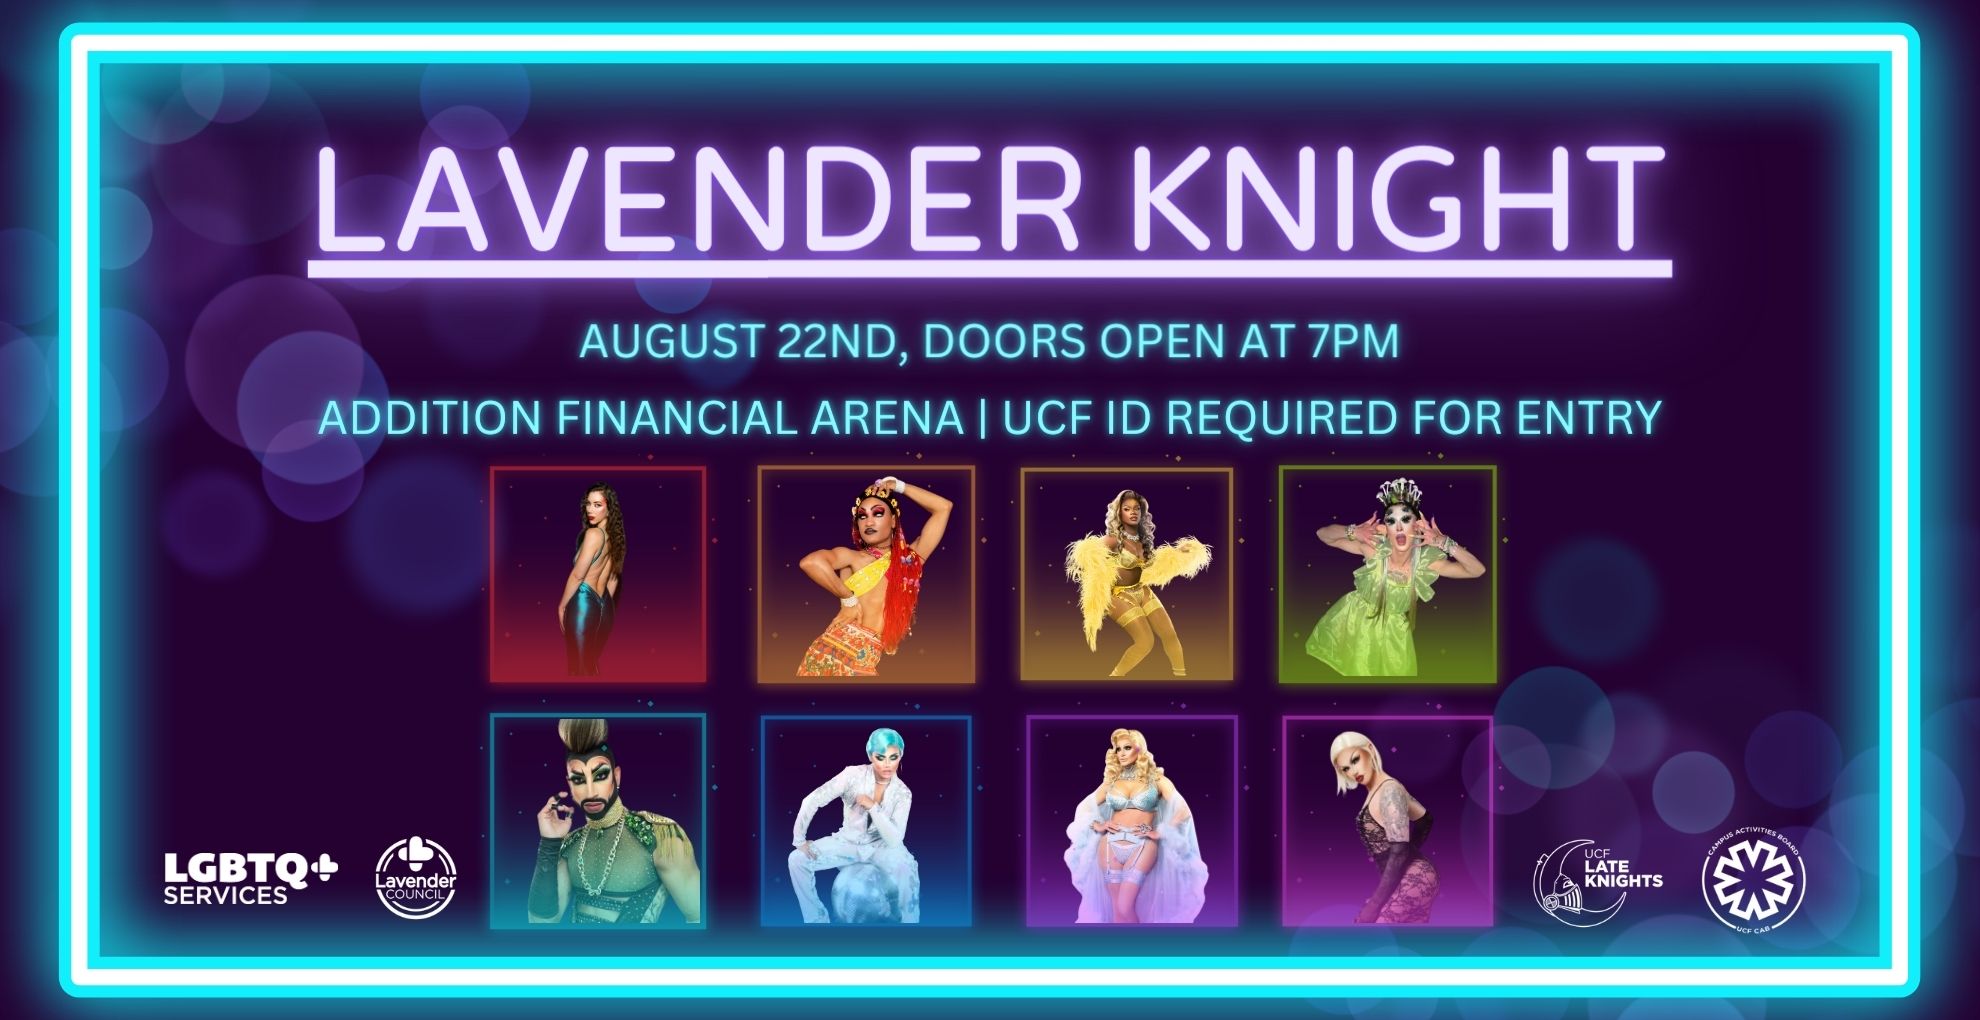 Illustration of eight drag performers. Text above says the following: Lavender Knight, August 22nd, doors open at 7pm, Addition Financial Arena, UCF Id required for entry